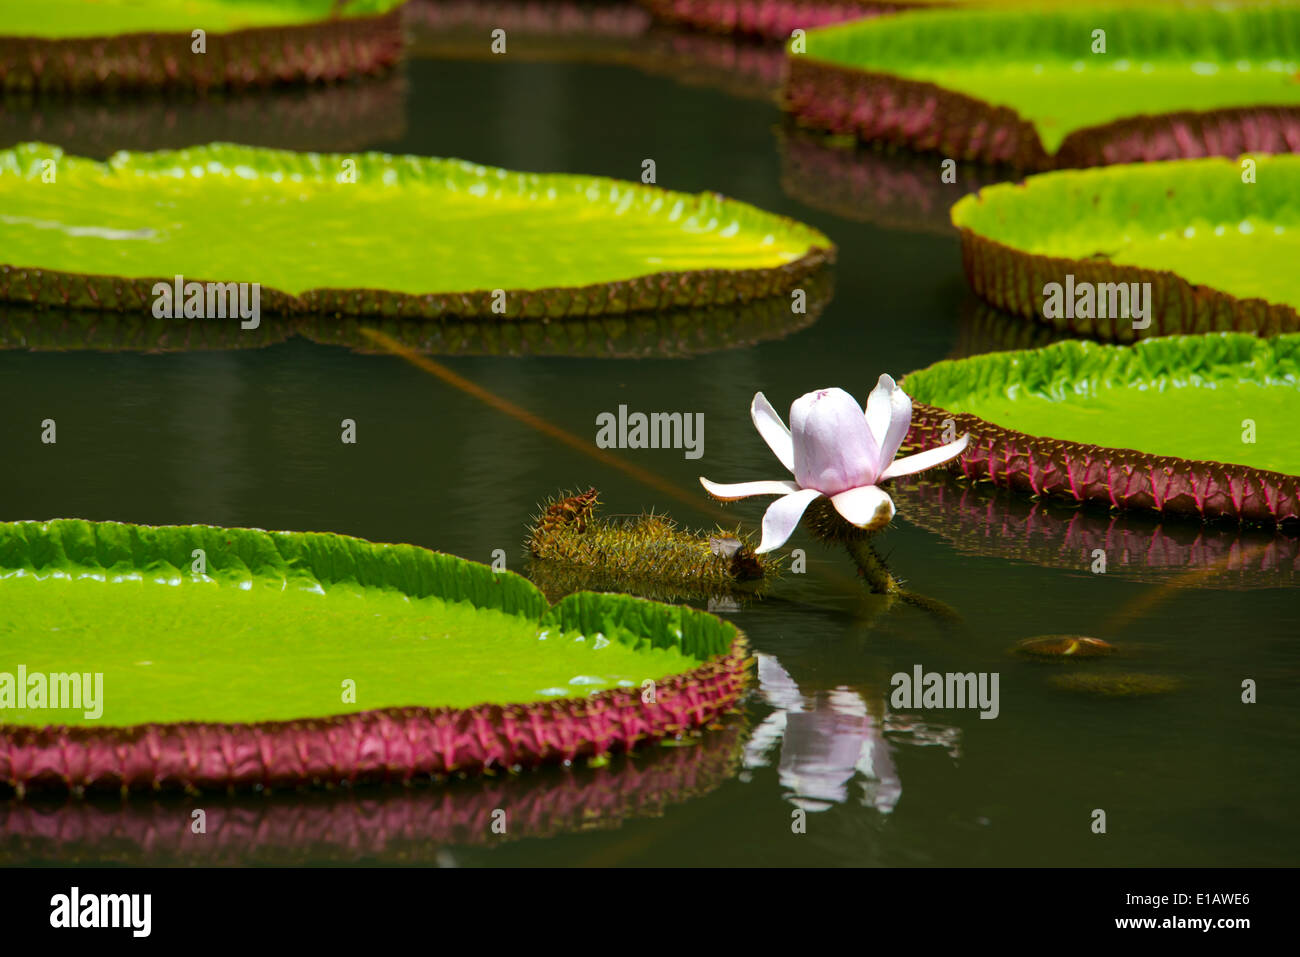 Victoria amazonica (giant water lily) at The Seewoosagur Ramgoolam Royal Botanical Garden, Pamplemousses, Mauritius Stock Photo